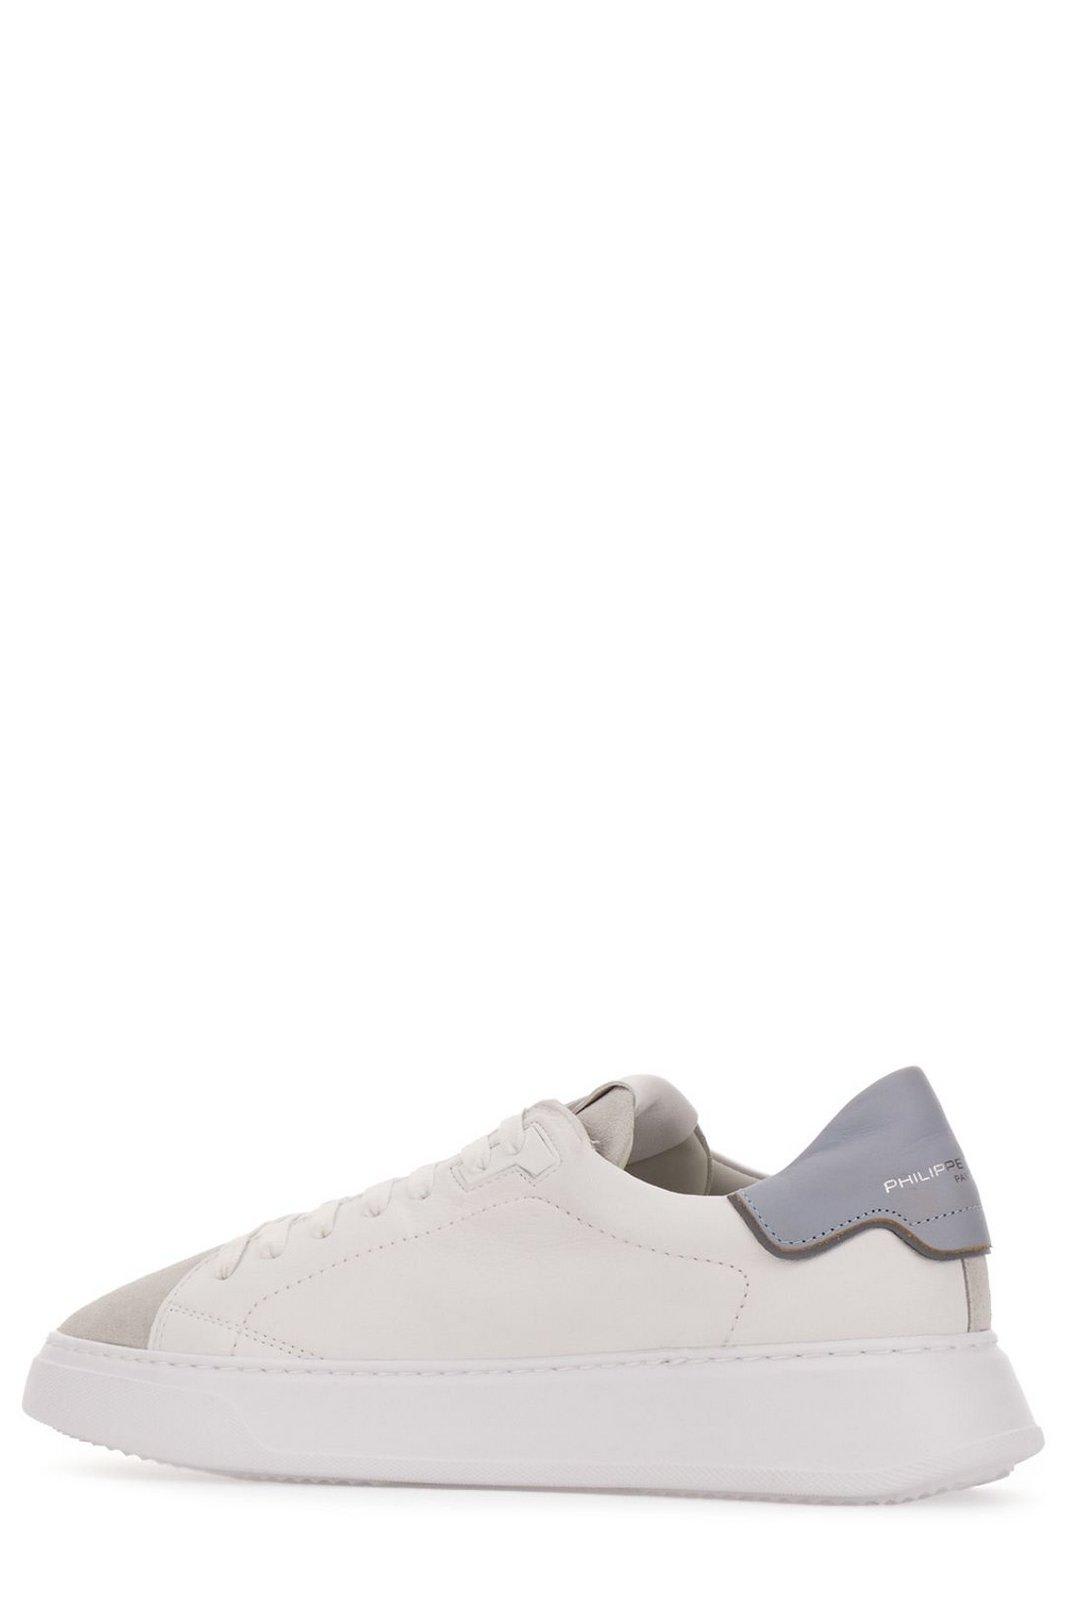 Shop Philippe Model Temple Lace-up Sneakers